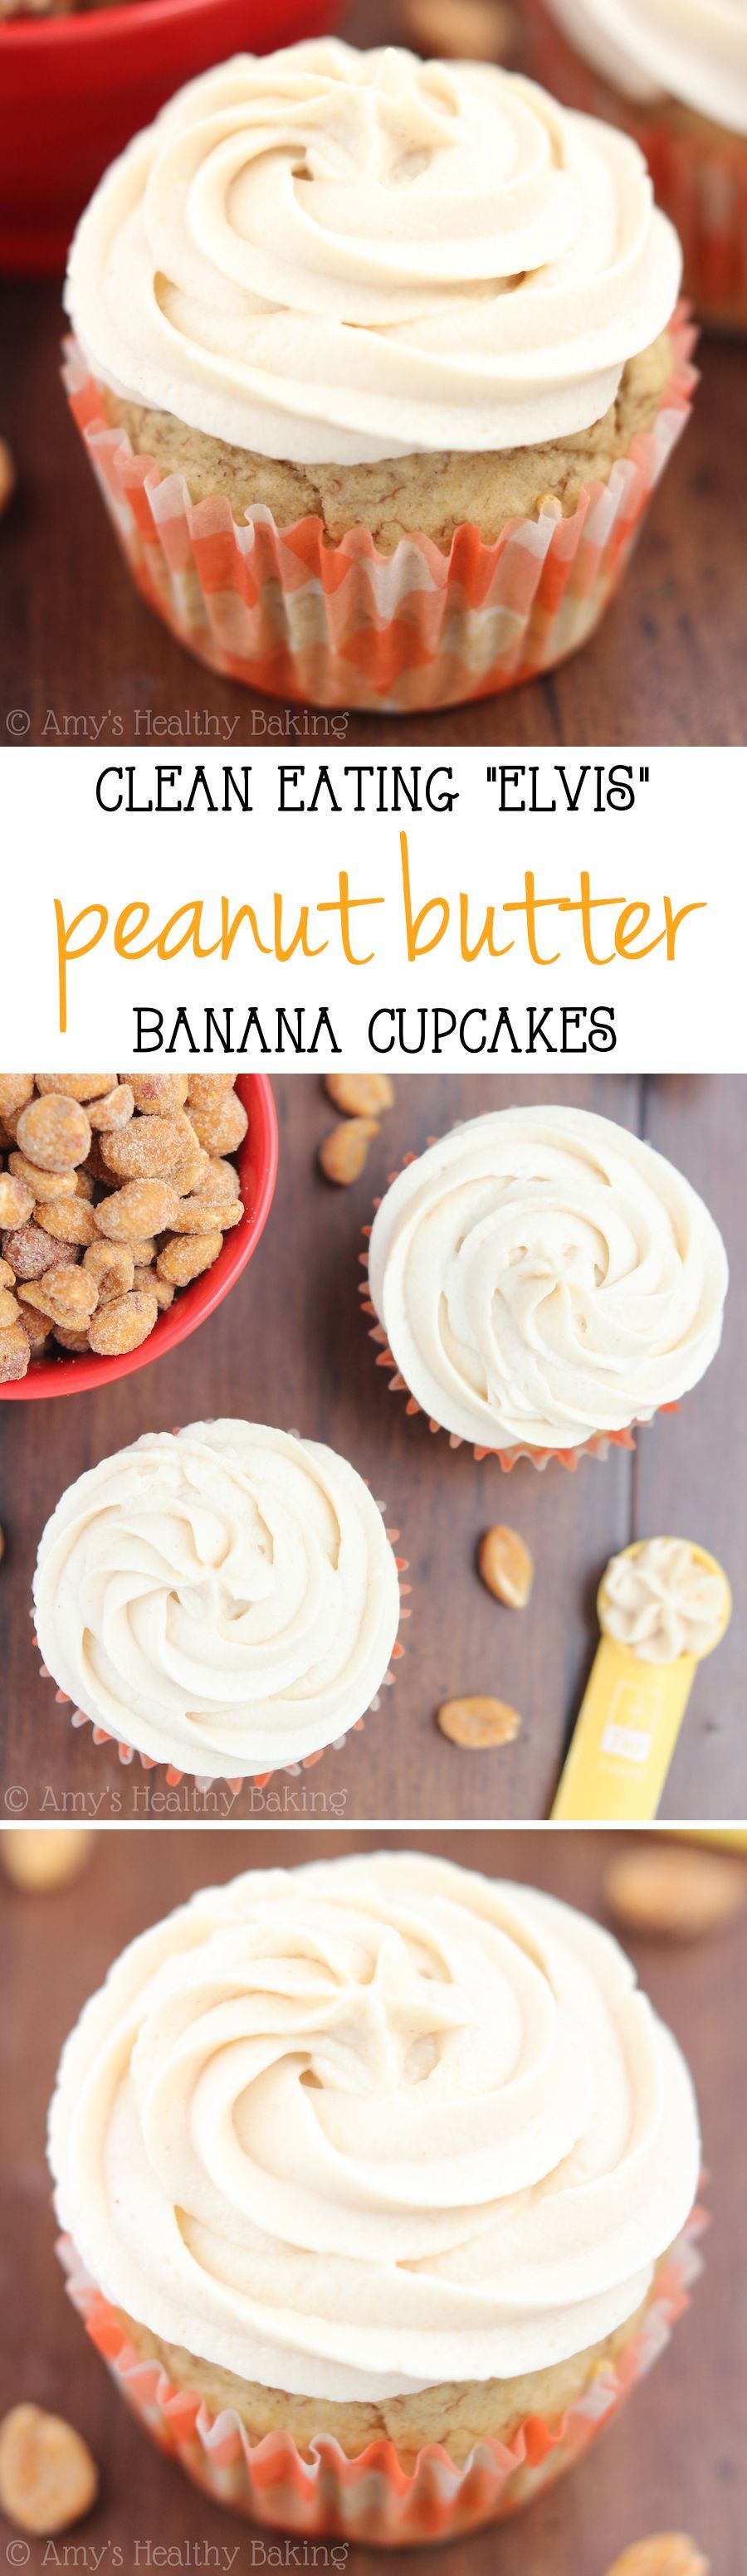 The BEST banana cupcakes I’ve ever made & topped with protein-packed Greek yogurt peanut butter frosting! Just 150 calories & 100%